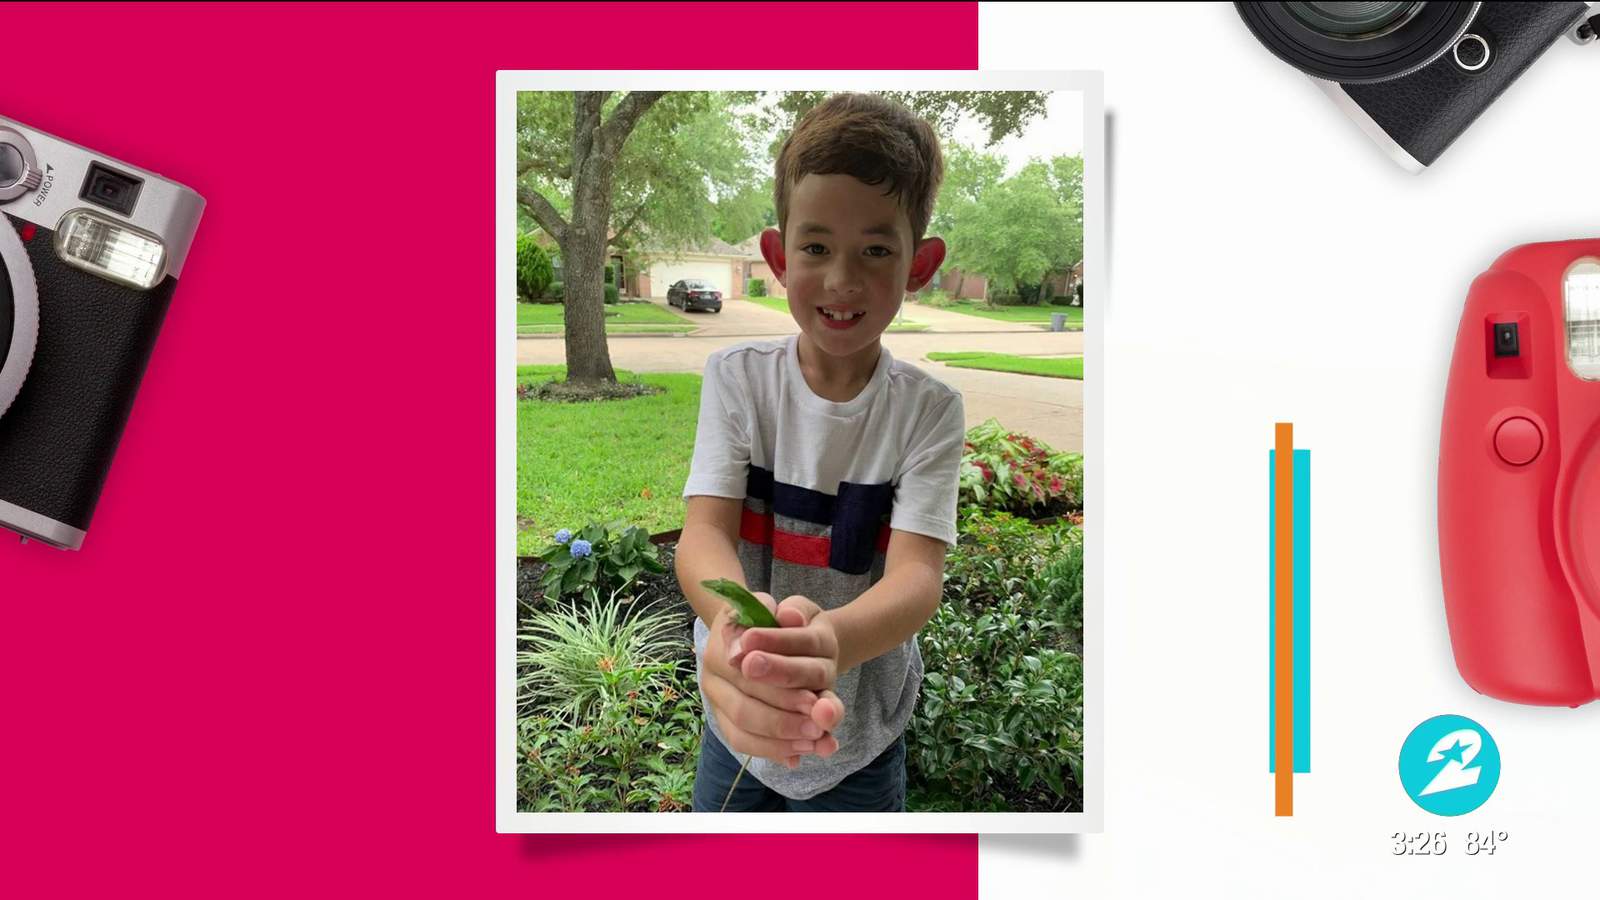 Meet the 8-year-old boy rising above his diabetes diagnosis